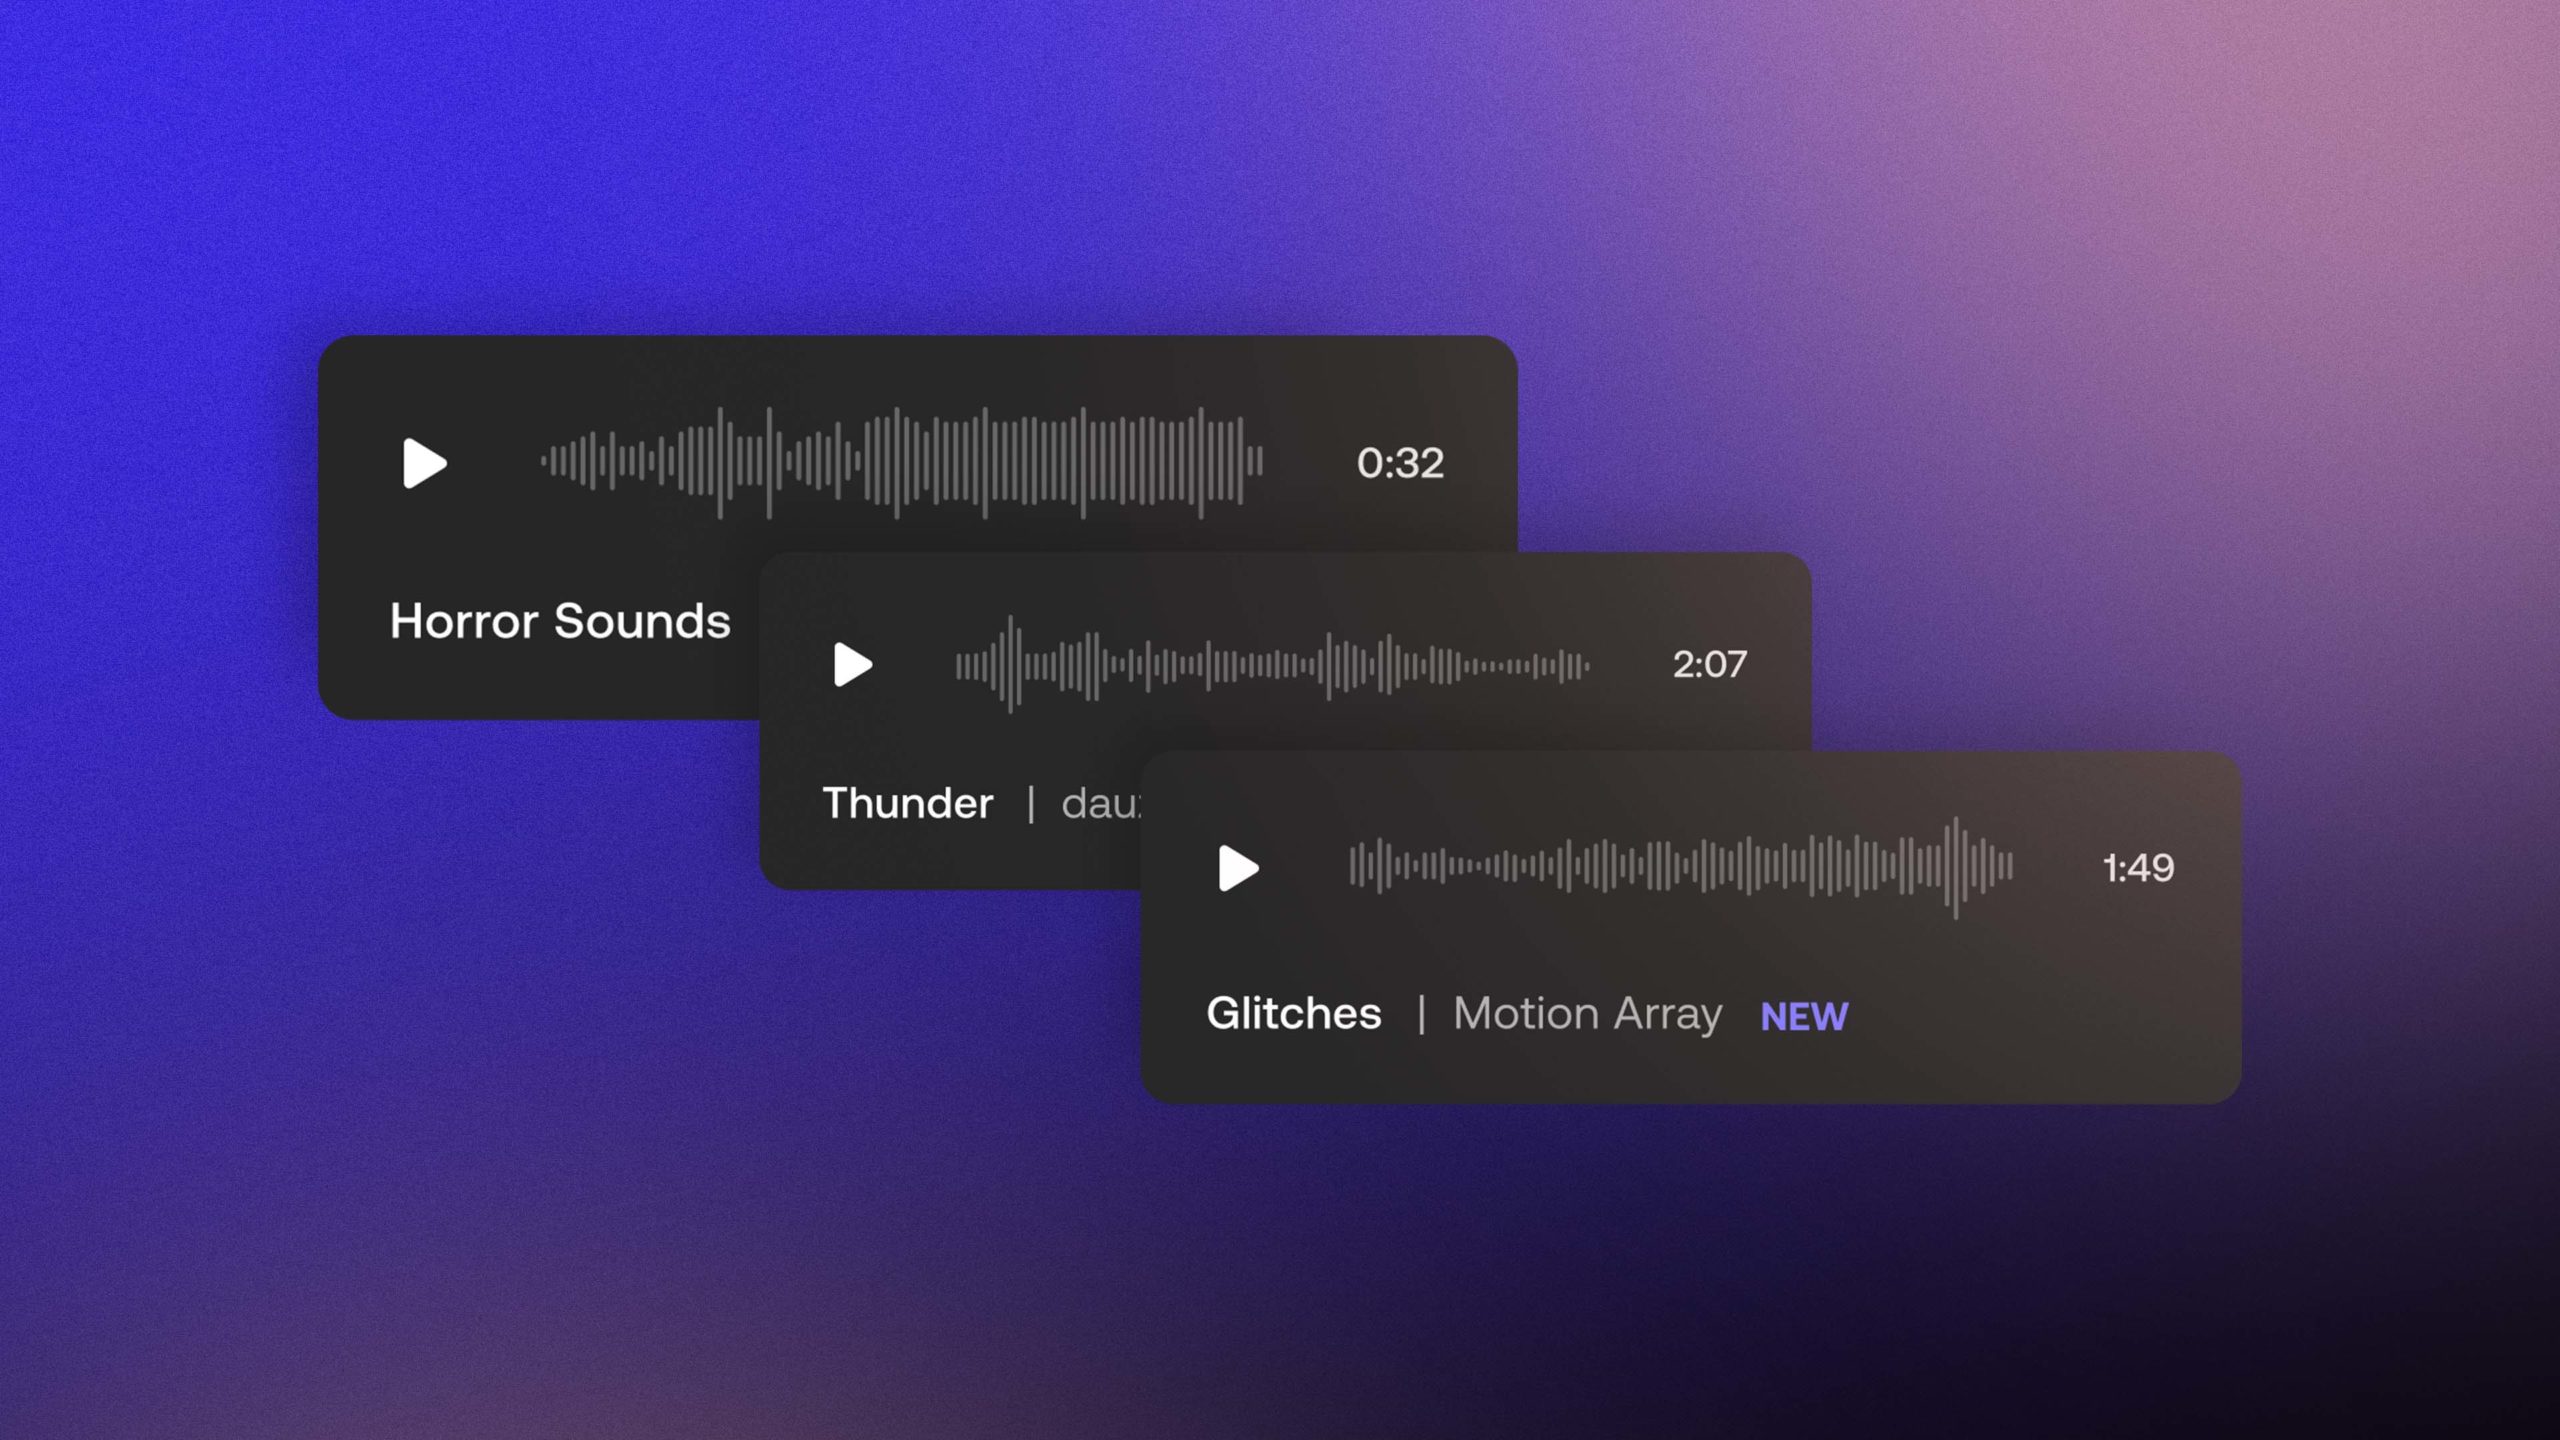 Top 25 Free & Paid Transition Sound Effects For Editors - Motion Array